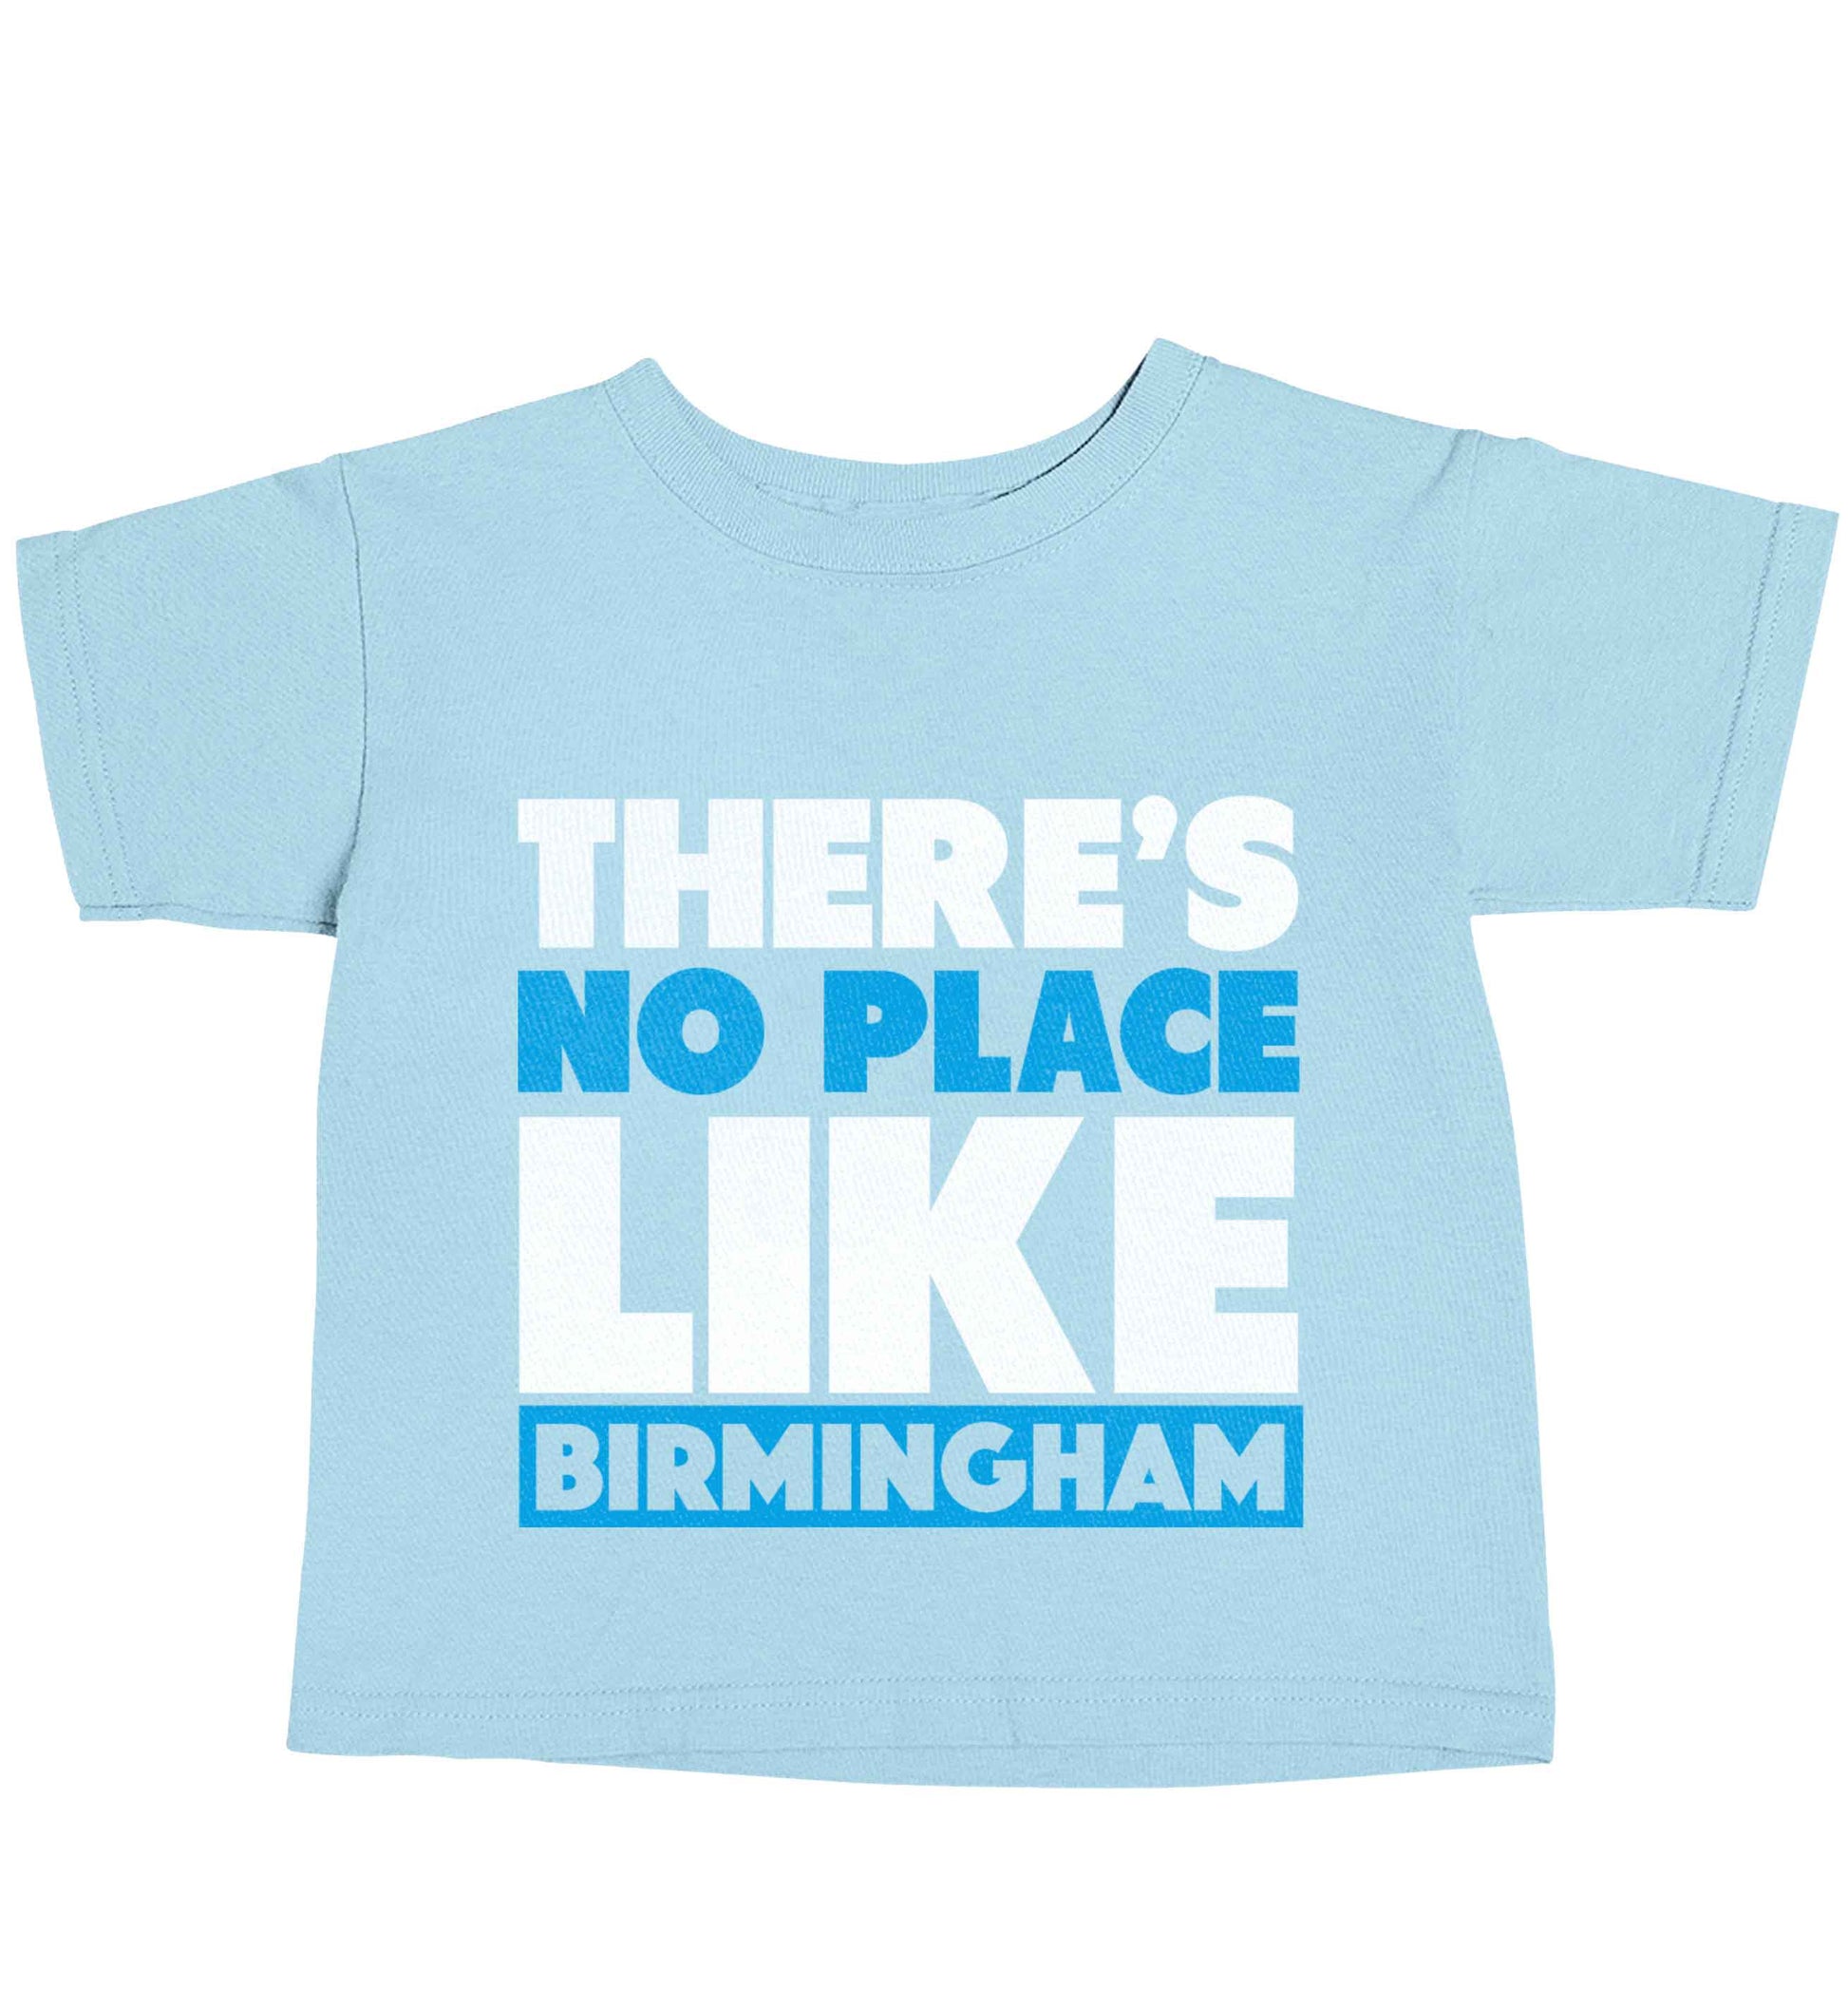 There's no place like Birmingham light blue baby toddler Tshirt 2 Years